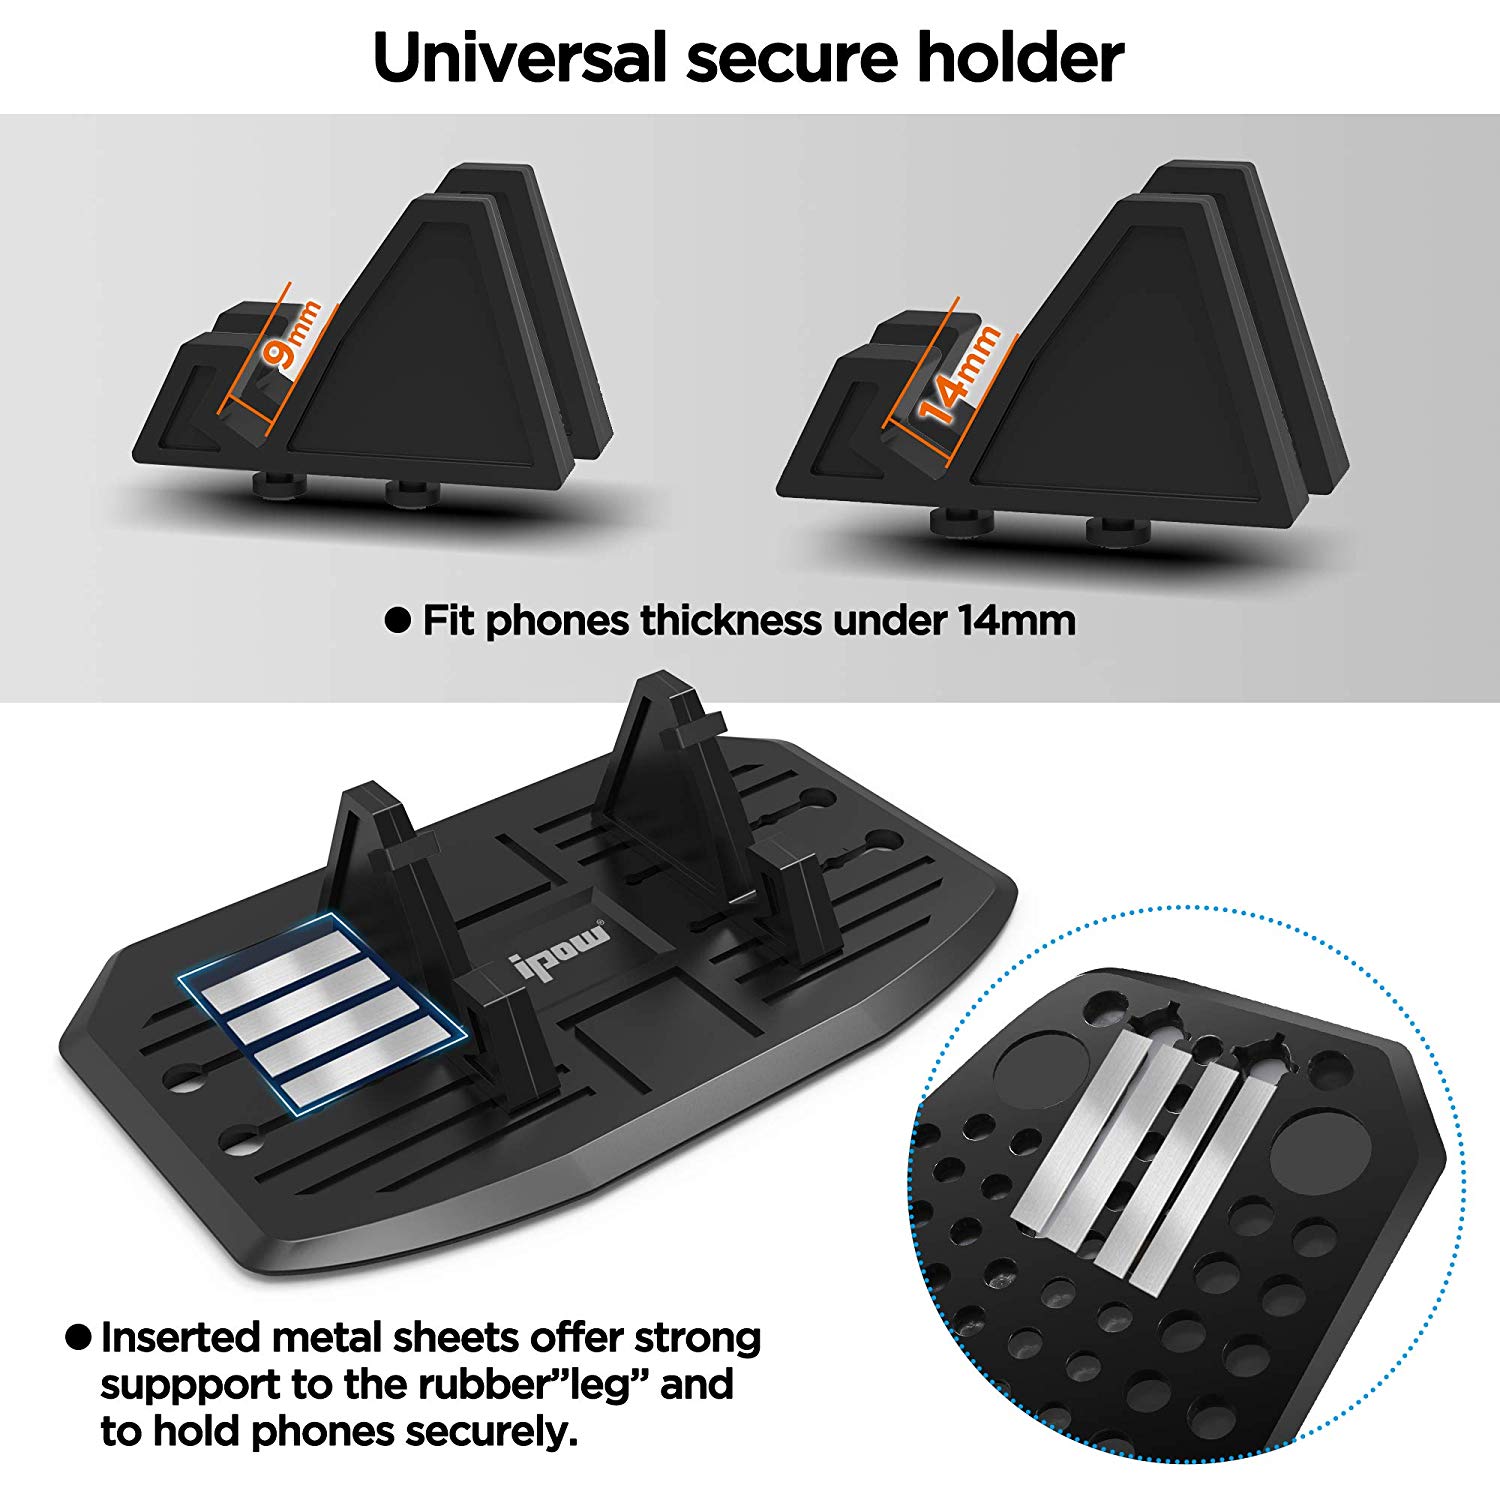 IPOW Dashboard Phone Holder Universal Car Dash Cell Phone Mount Holder Silicone Stand Dock Cradle for Smartphone iPhone, Samsung Galaxy, HTC, LG, Note, Nexus - image 5 of 7